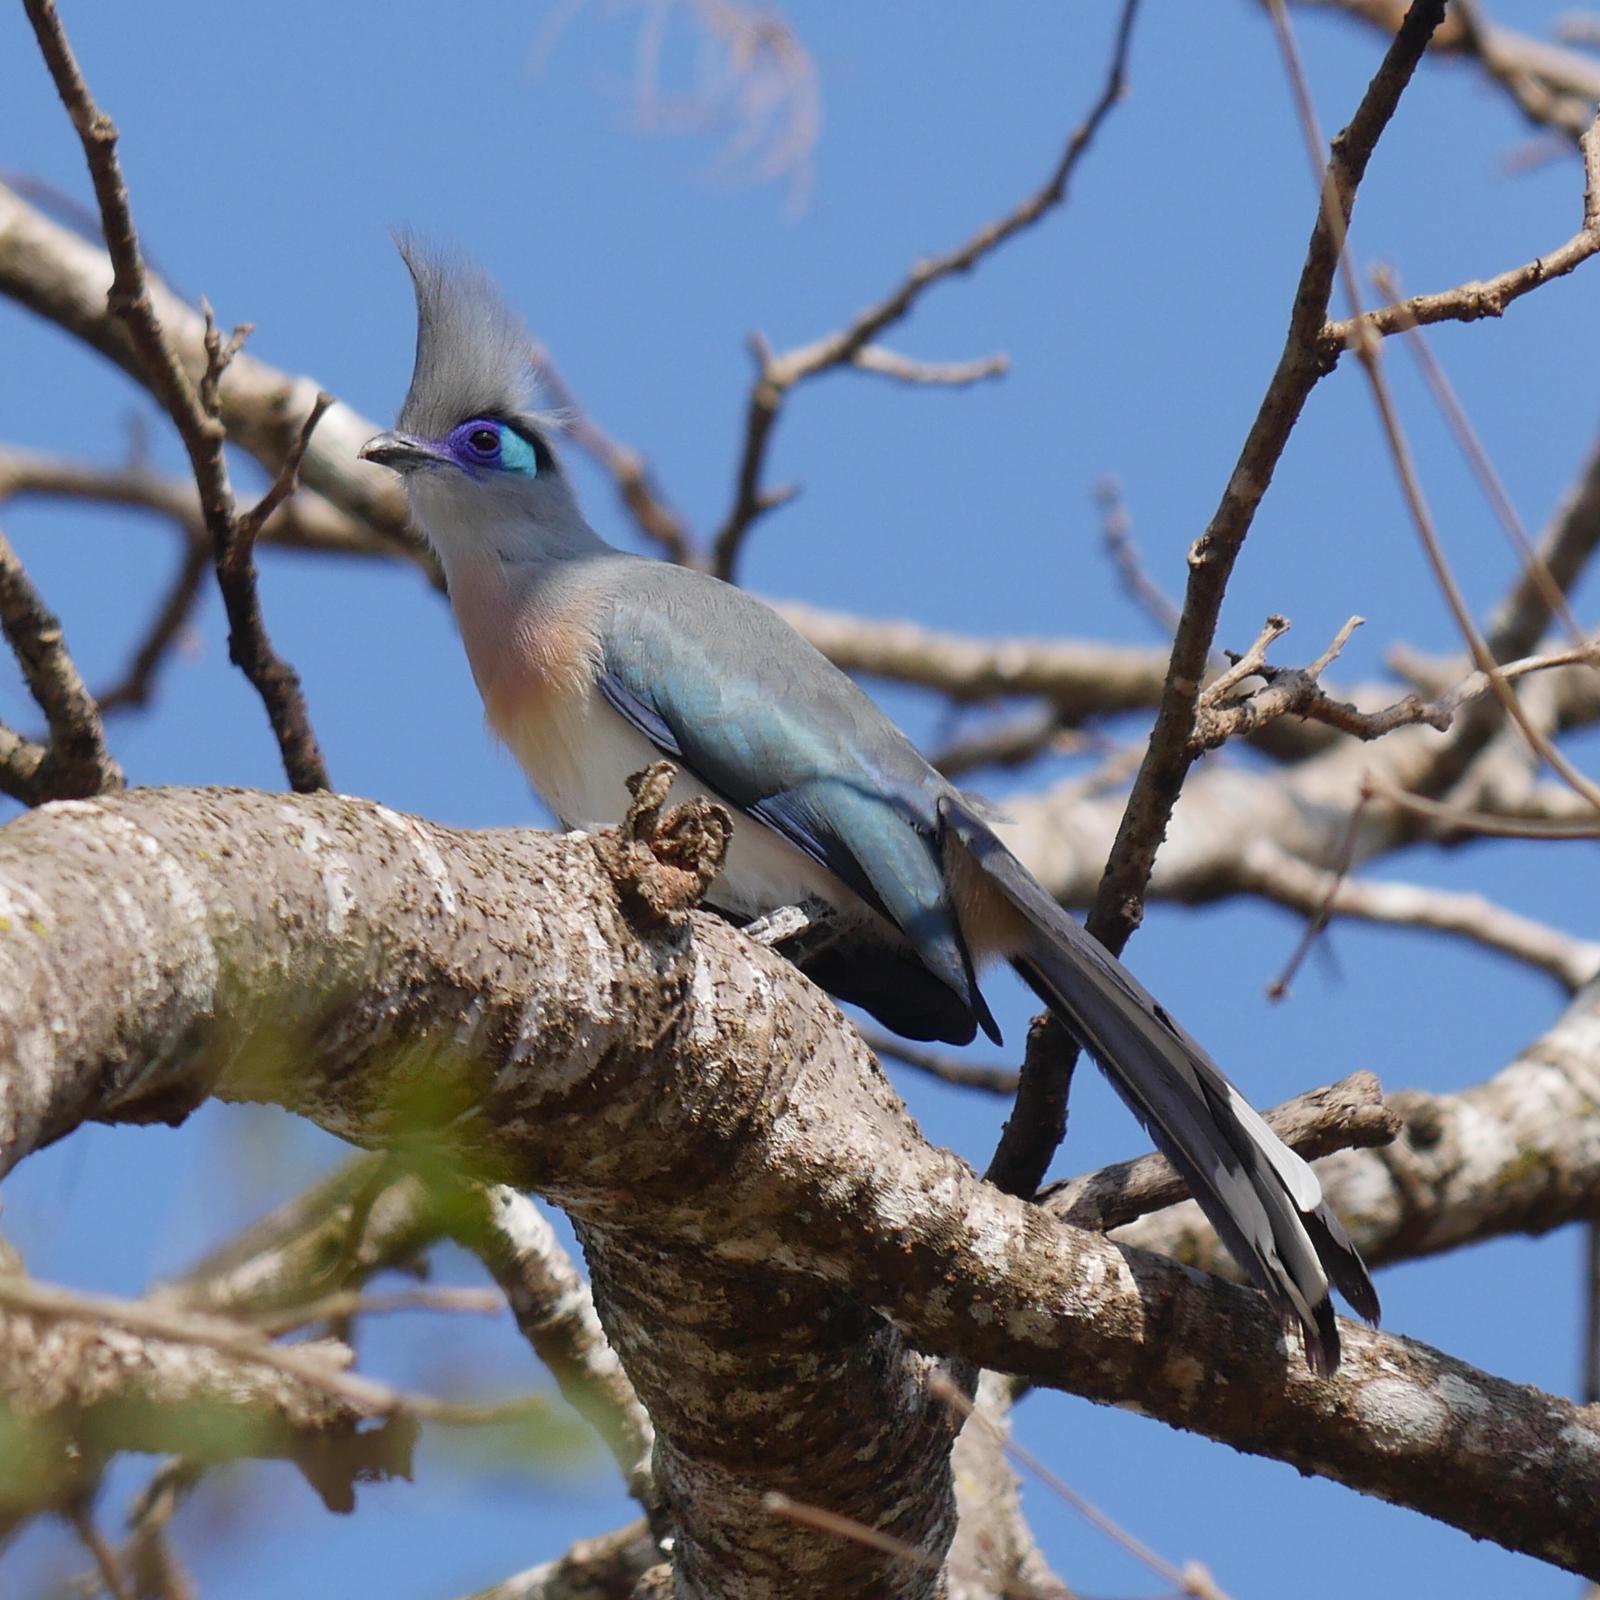 Crested Coua Photo by Peter Lowe